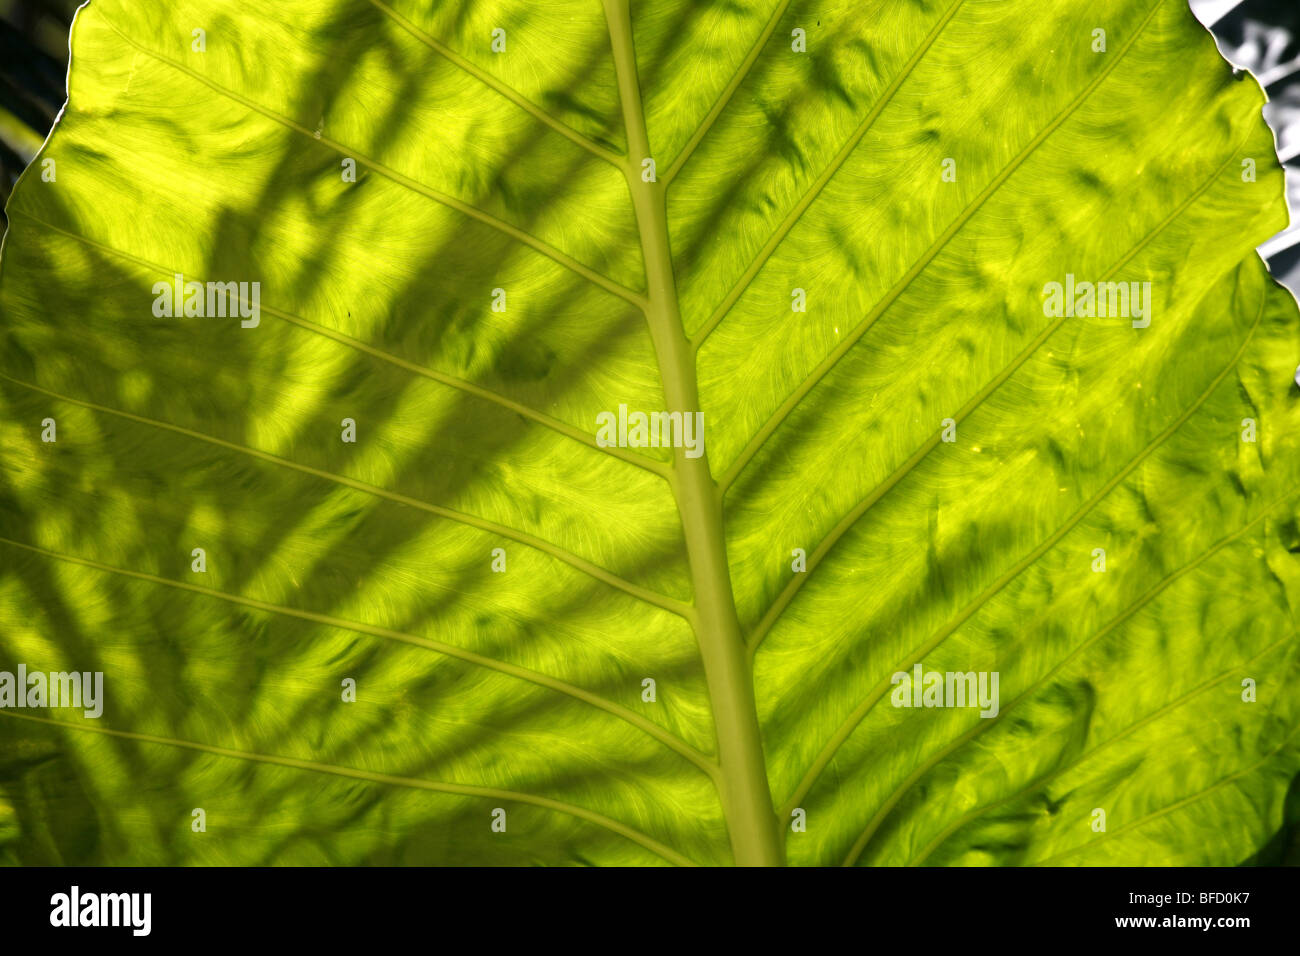 Tropical vegetation and leaves Stock Photo